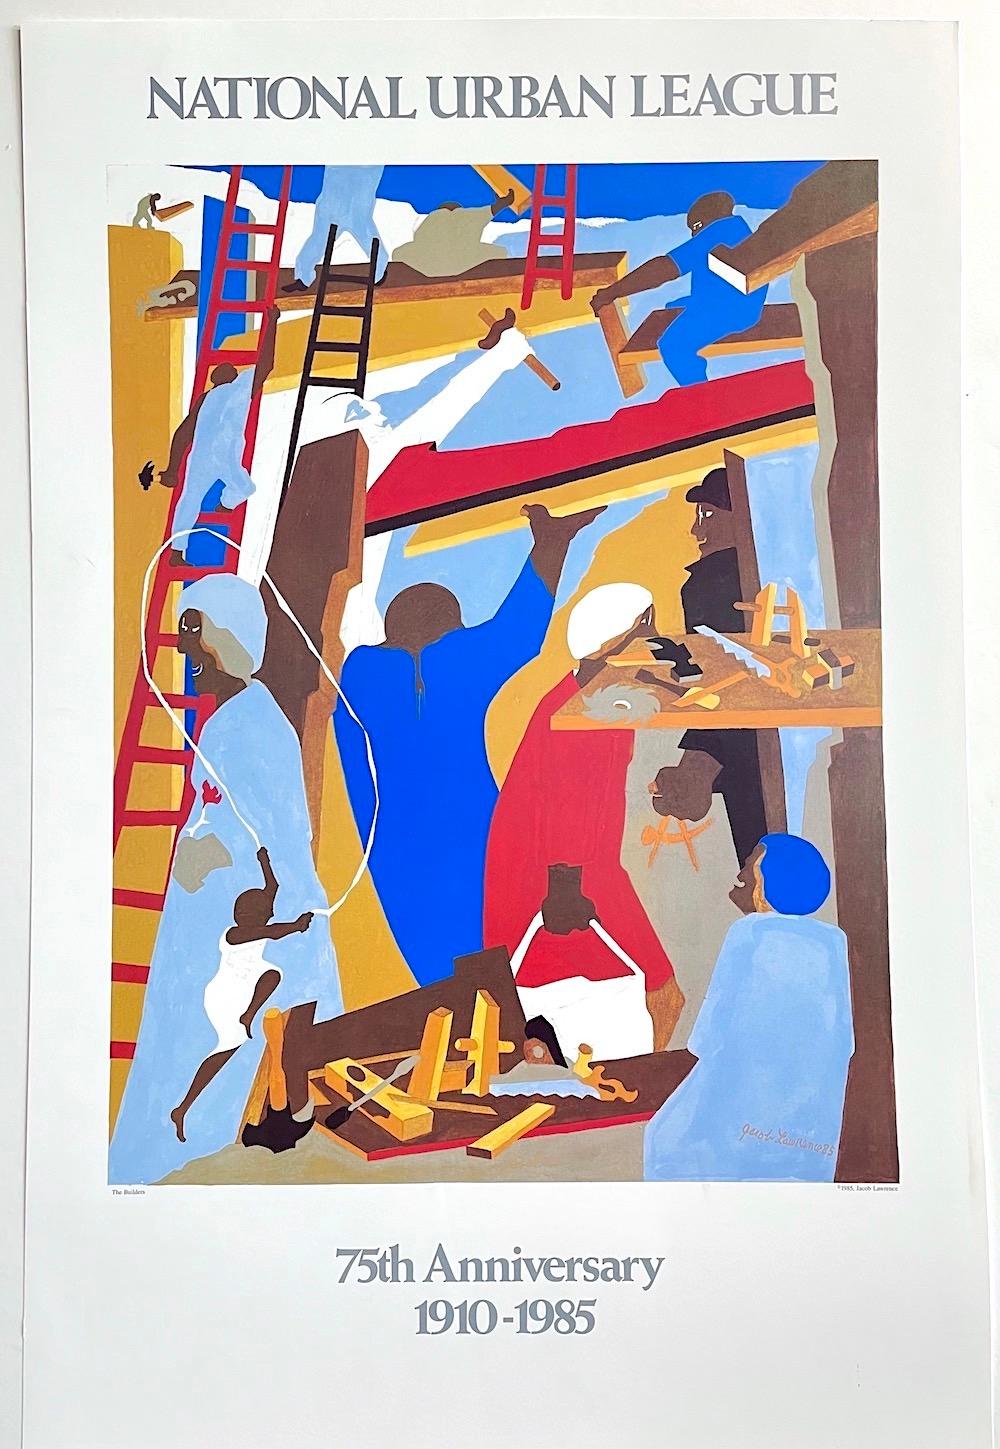 JACOB LAWRENCE
THE BUILDERS 1985
Commemorative Poster - National Urban League 75th Anniversary 1910-1985, original 1985 printing
Poster size -  35.25 x 23 inches, unframed, unsigned
Image size - 23.75 x 19 in.

THE BUILDERS is a specially